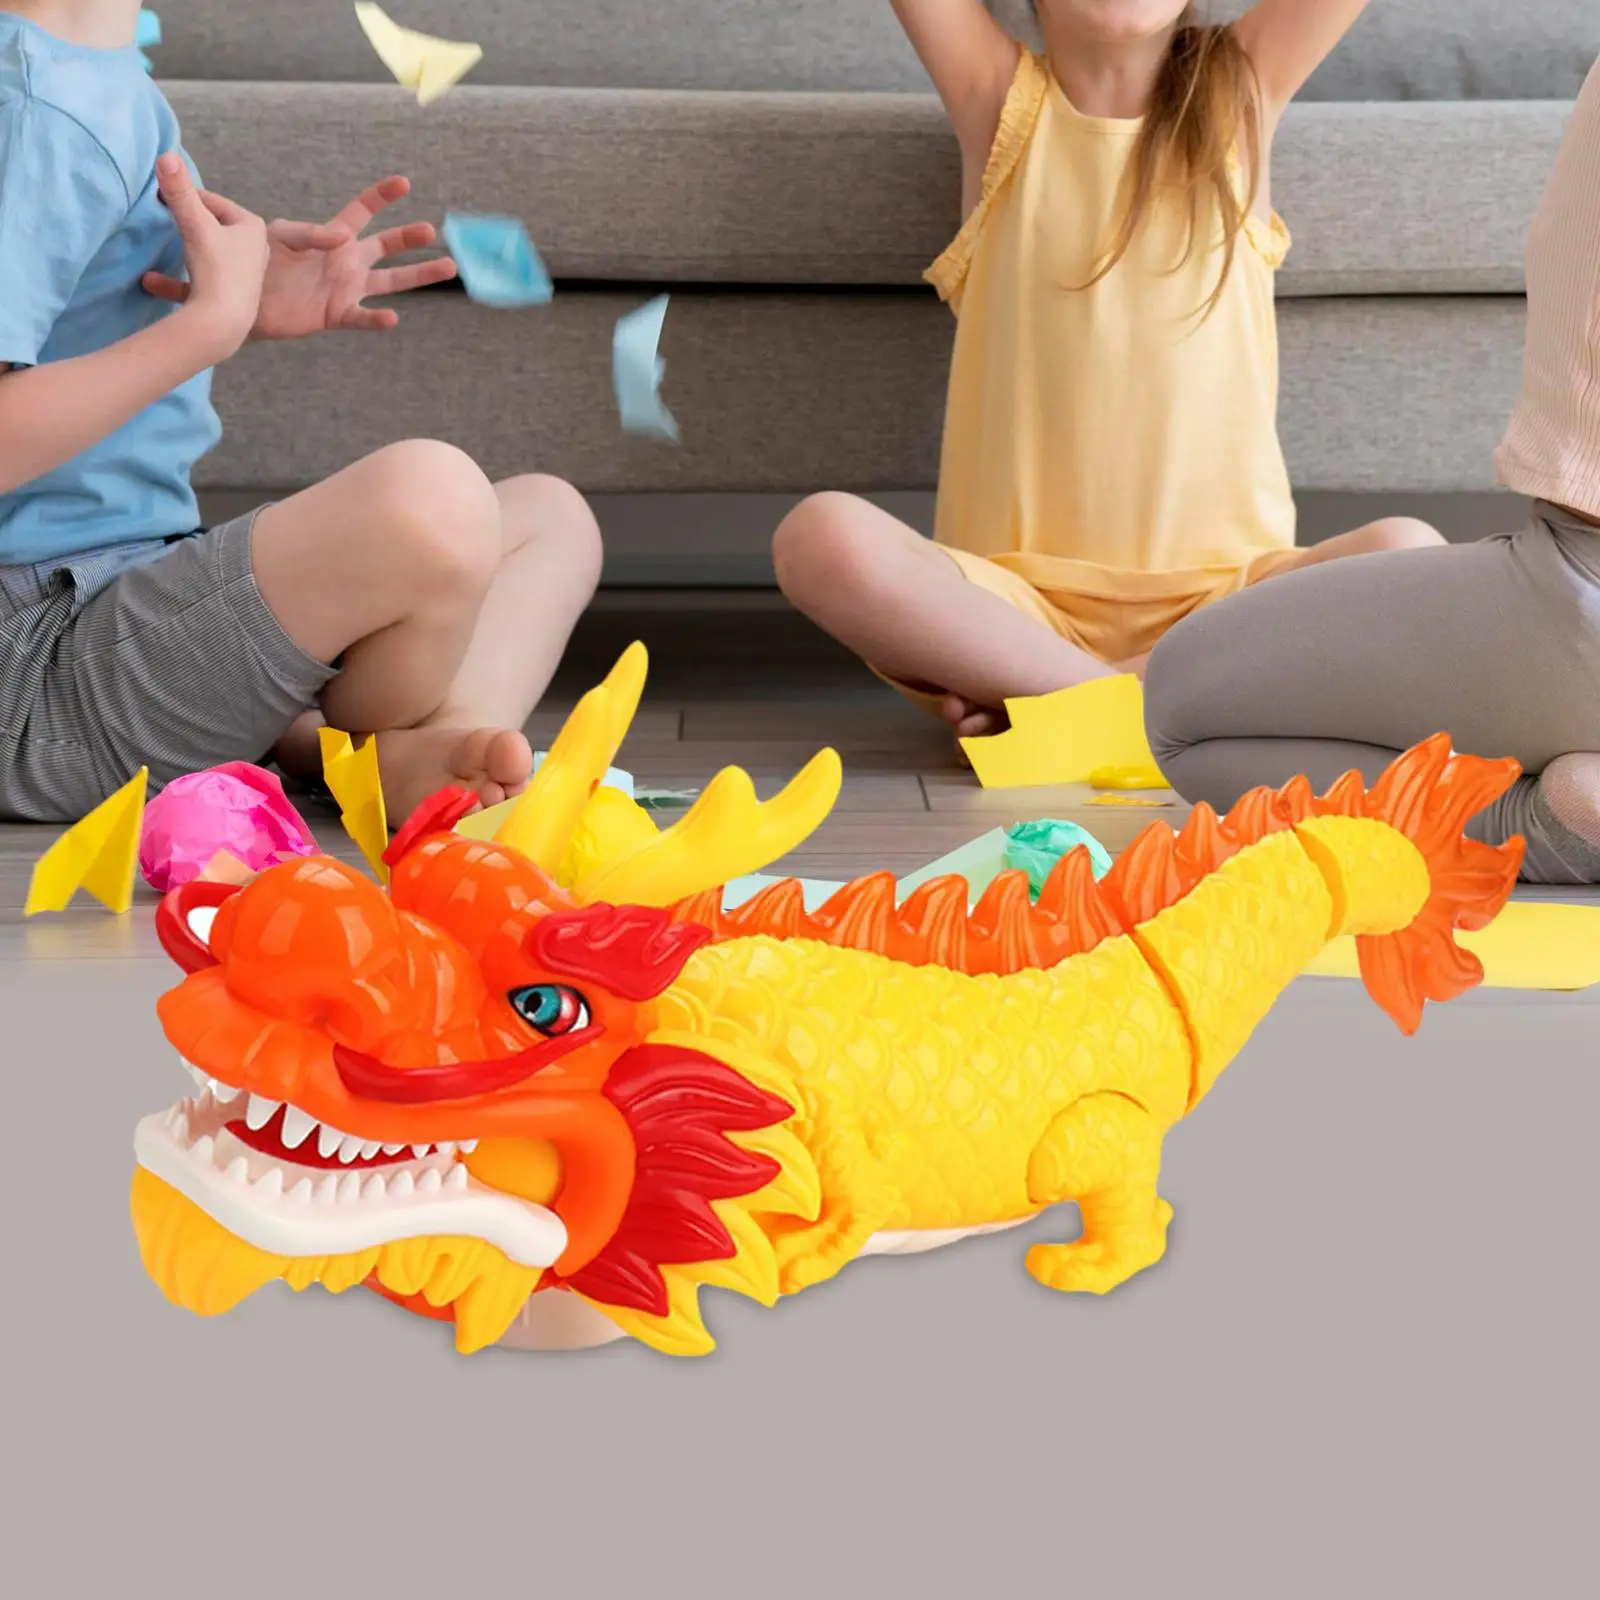 Eletric Dragon Toy Animal Mechanical High Simulation Creative Outdoors Gifts Flexible for Girls Children Boys Adults Age 8-12